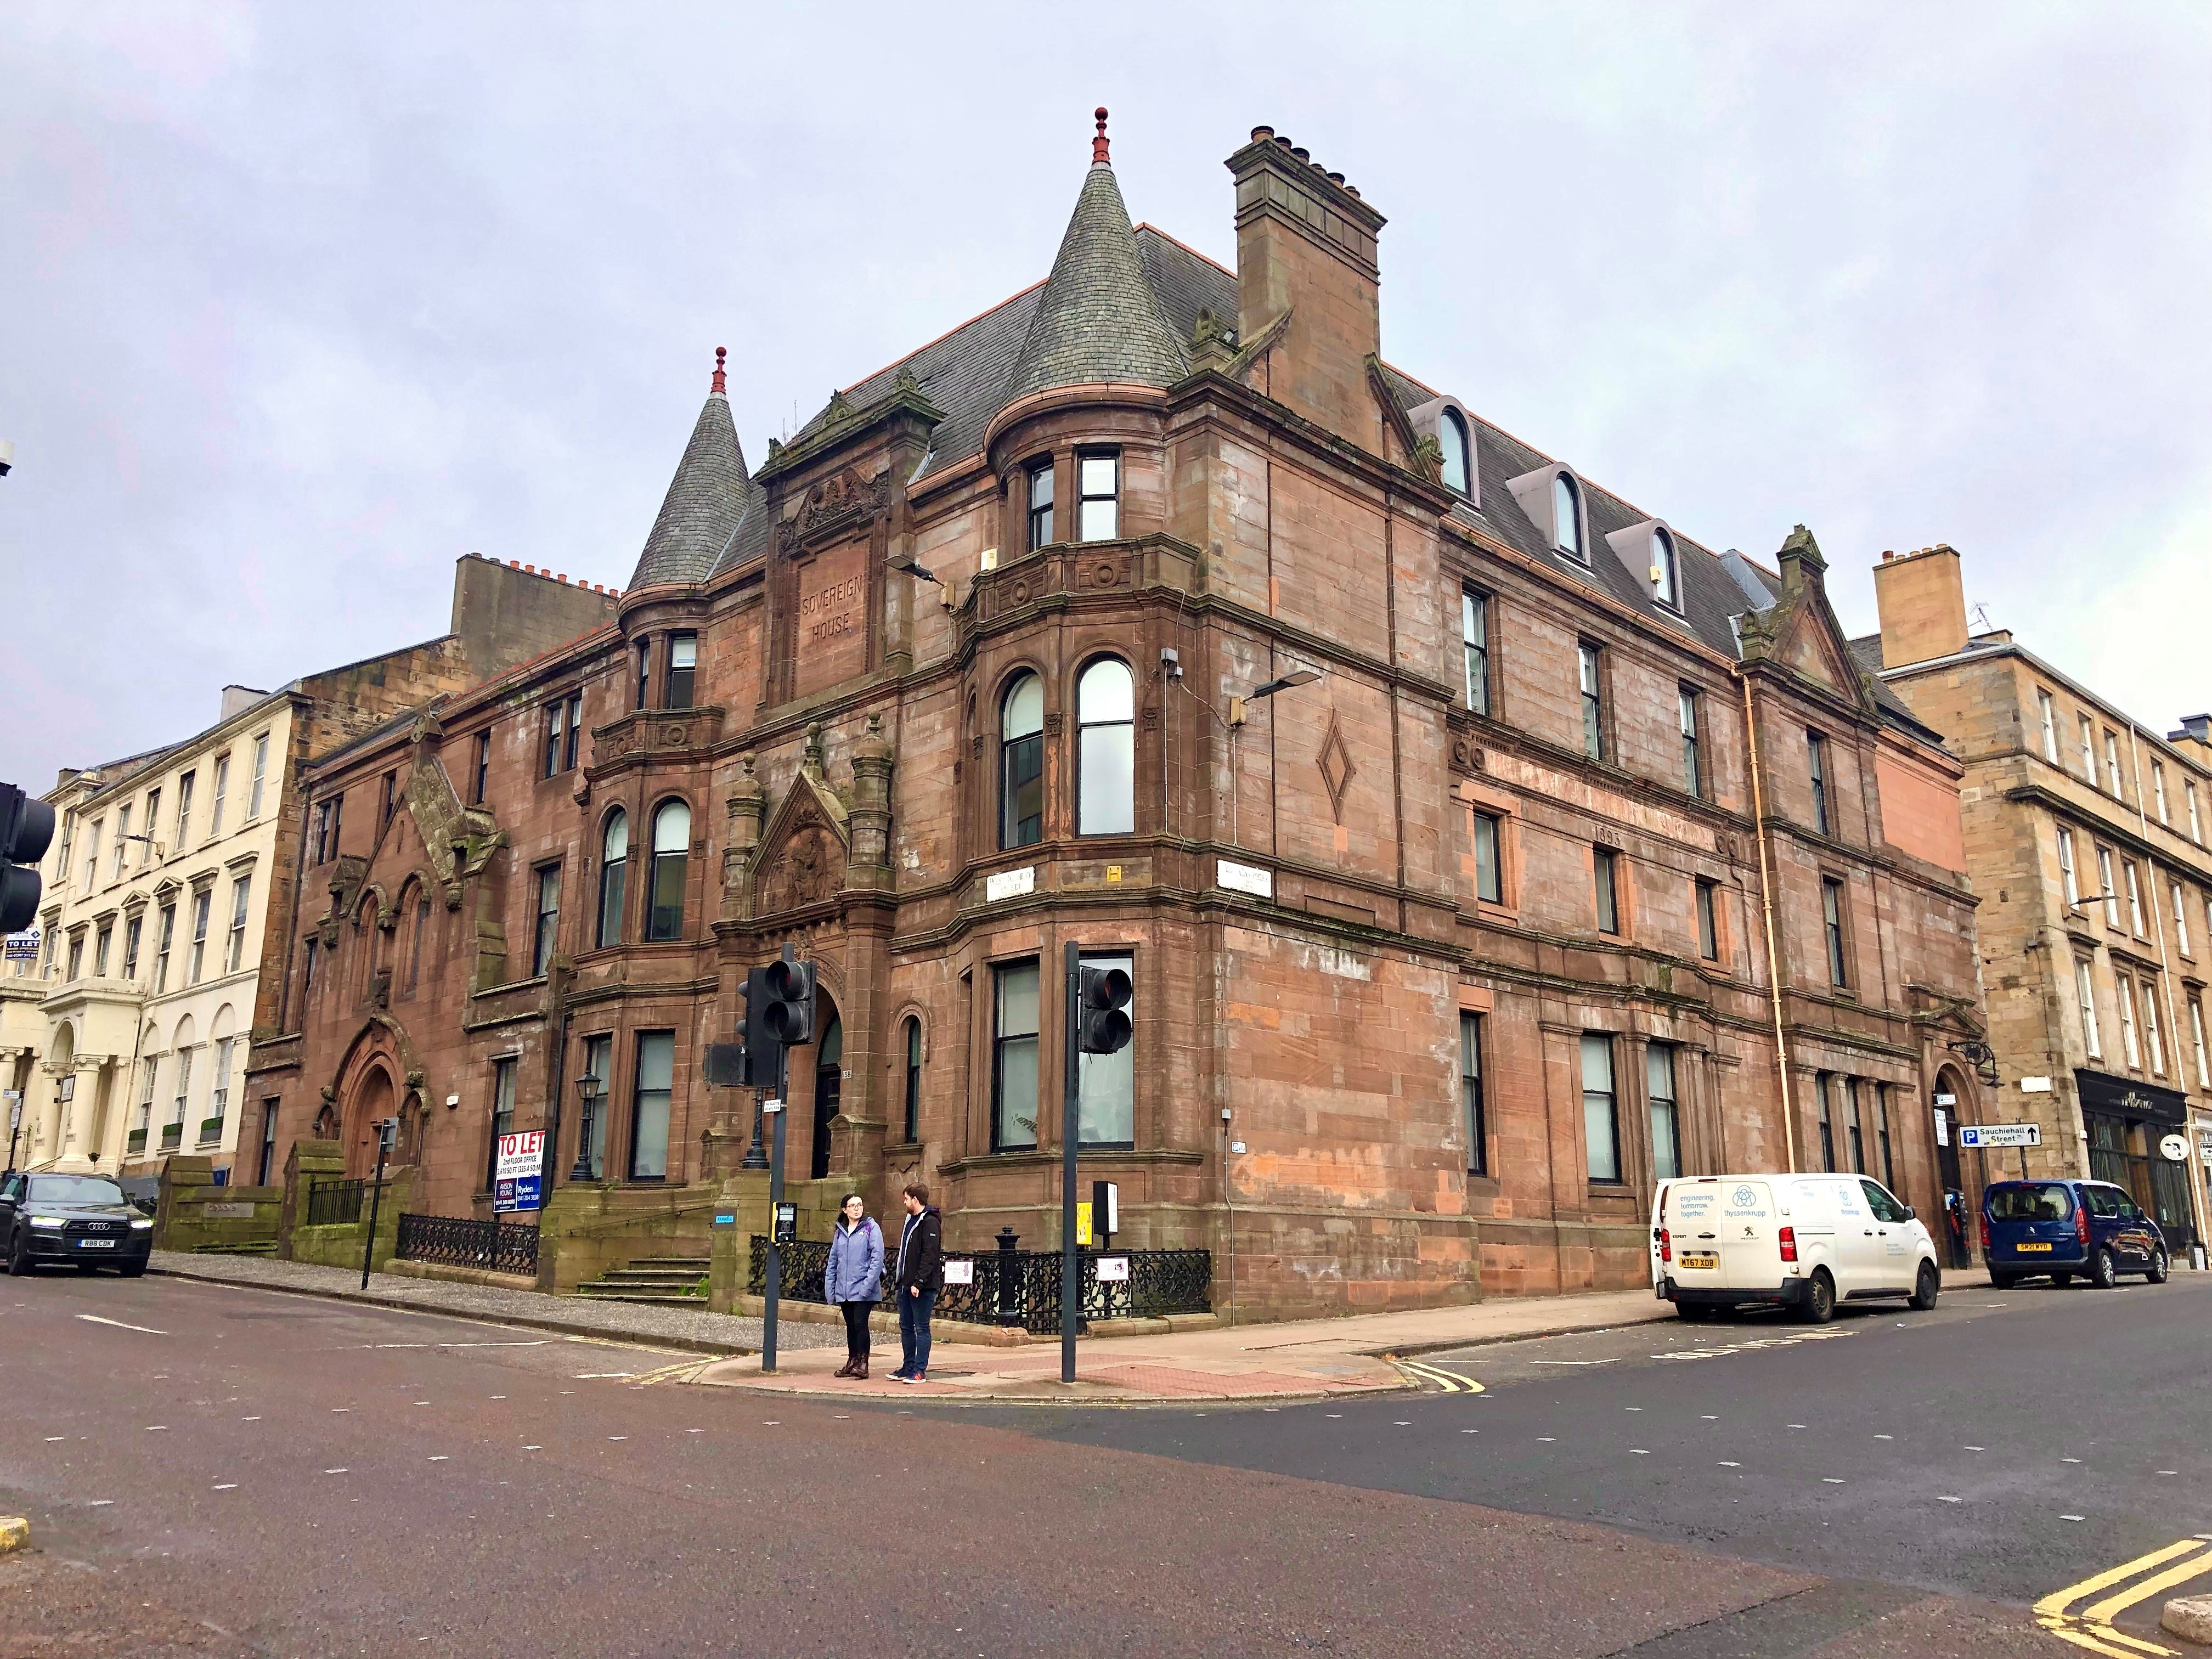 Keppie Design's historic Glasgow office building sold to Middle Eastern investor for £4.95m